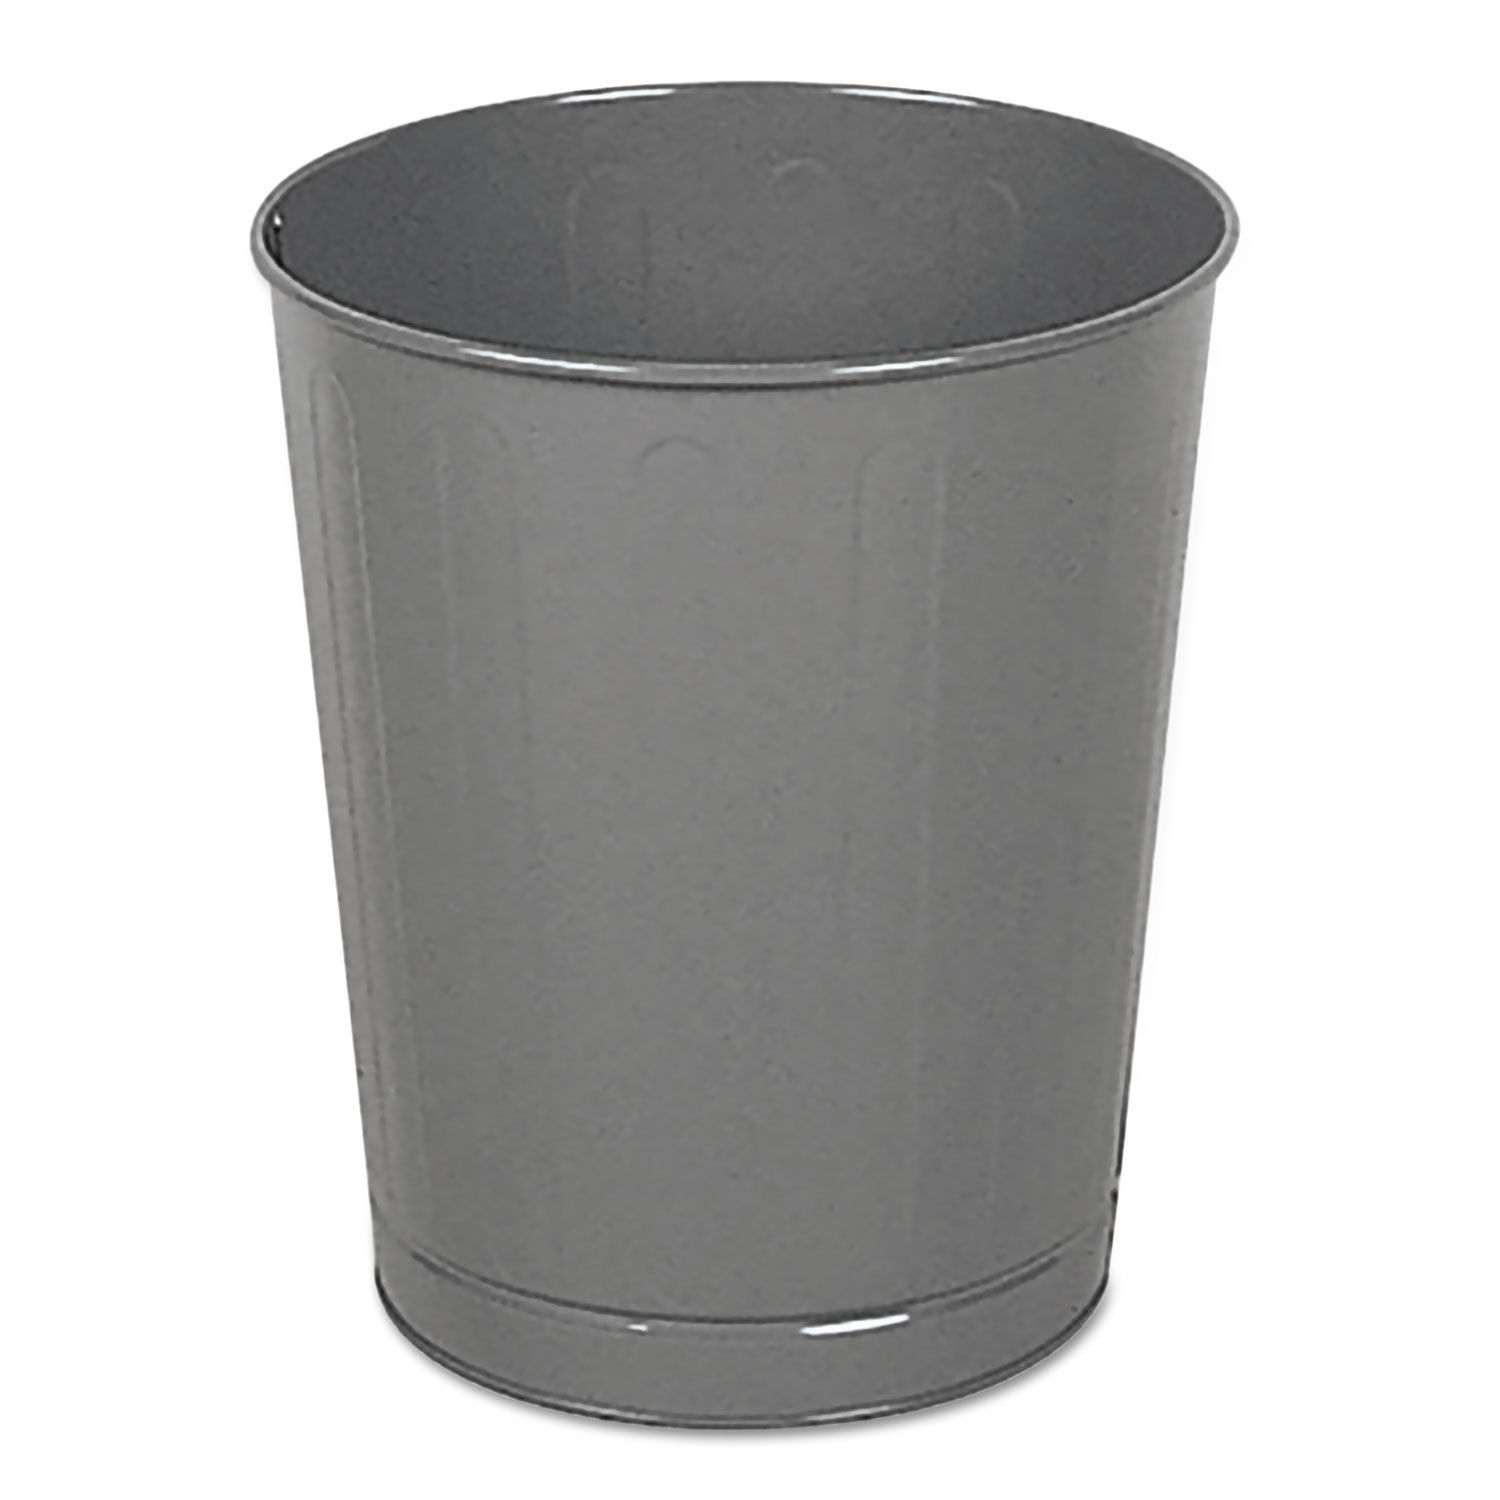  Rubbermaid Commercial FGWB26GR Fire-Safe Wastebasket, Round, Steel, 6.5 gal, Gray (RCPWB26GY) 